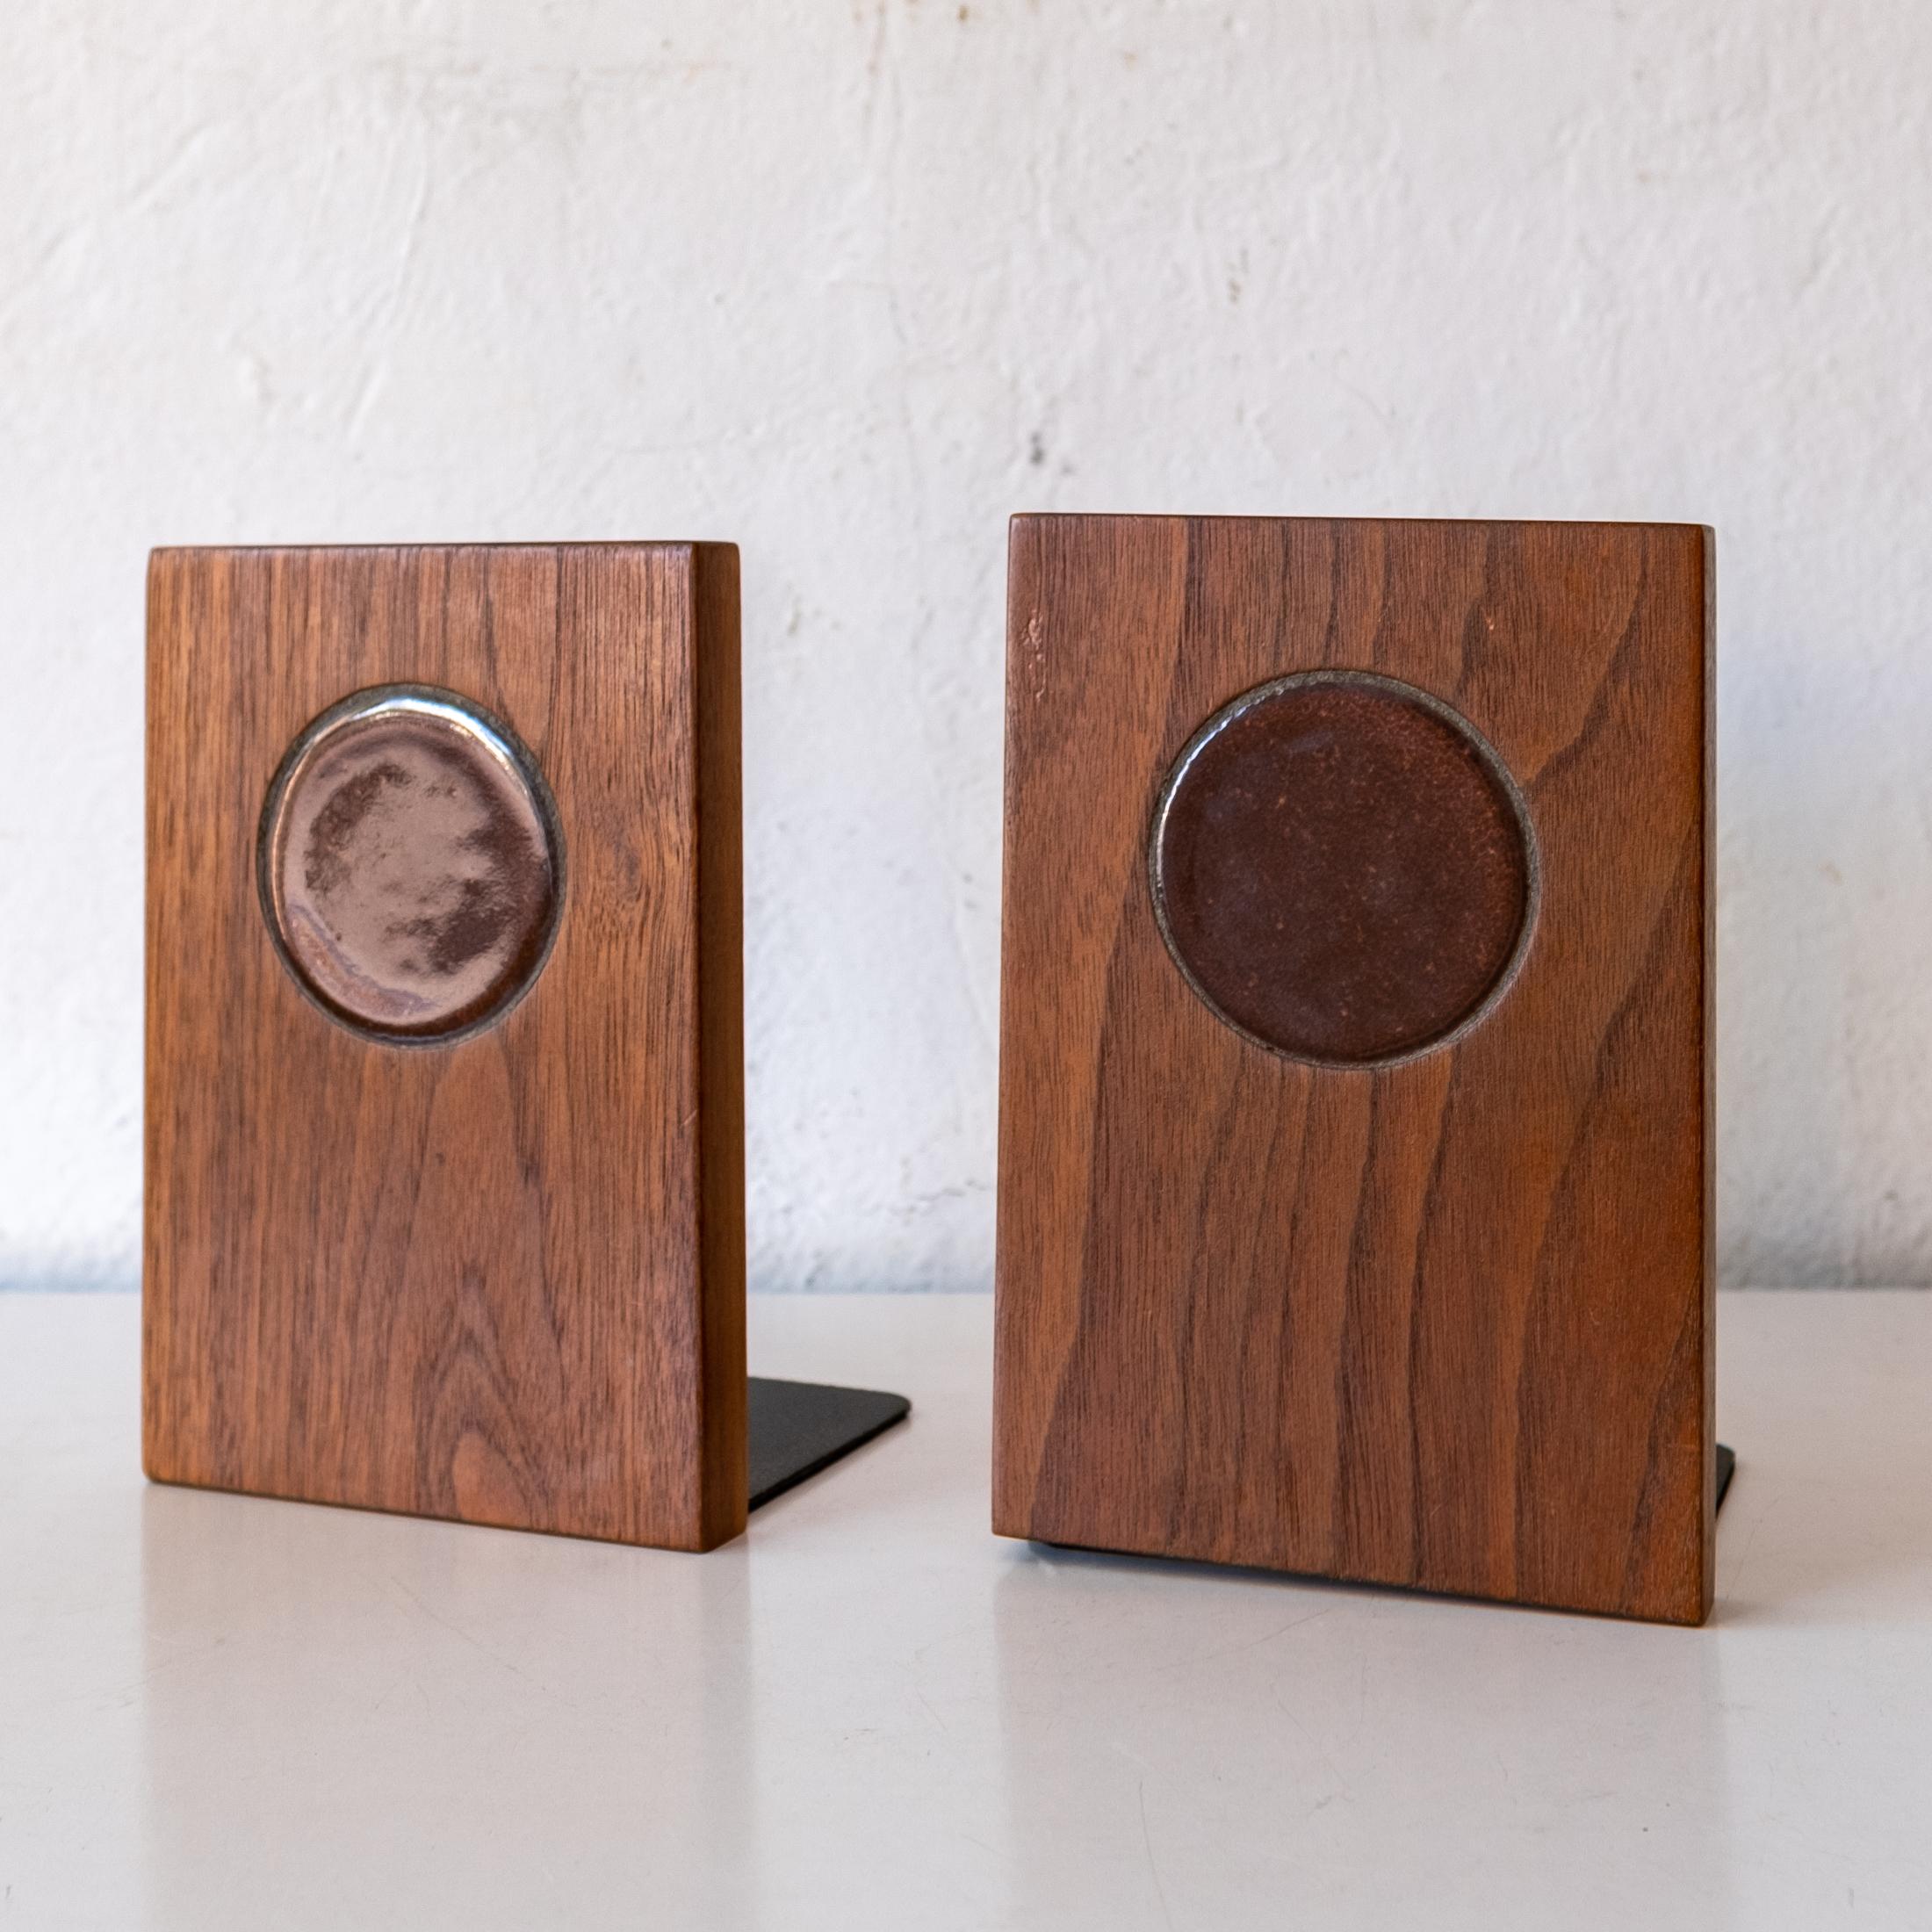 American Midcentury Walnut and Ceramic Tile and Bookends For Sale